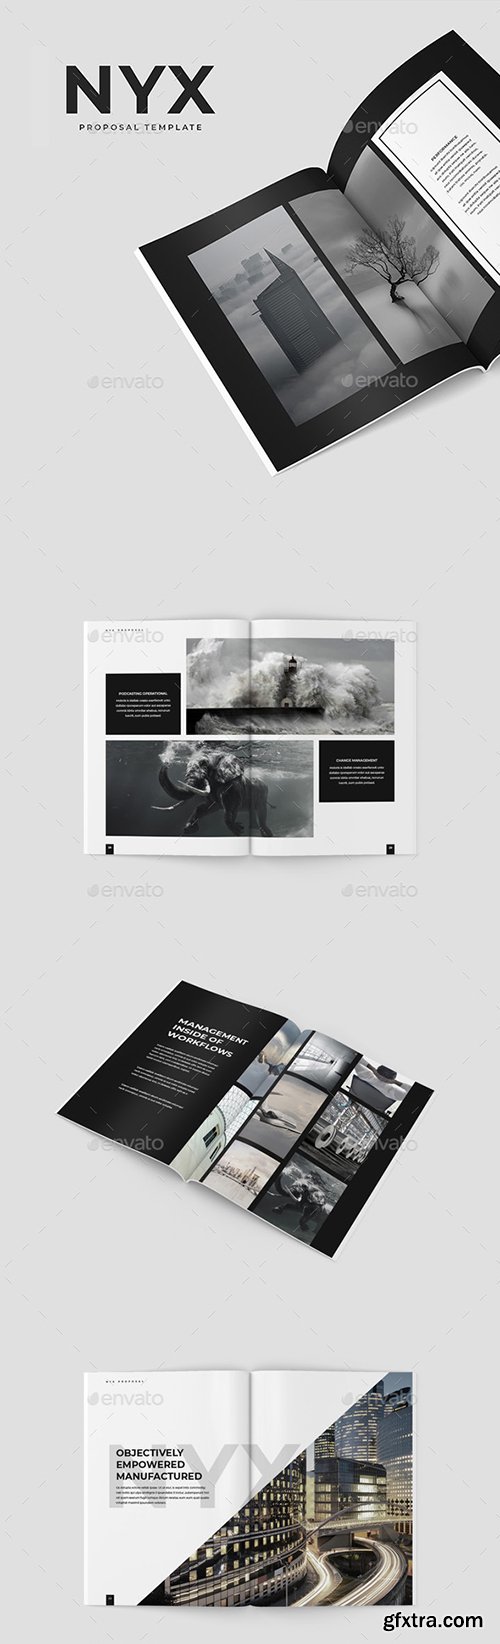 Graphicriver - Nyx Proposal Template 21952444